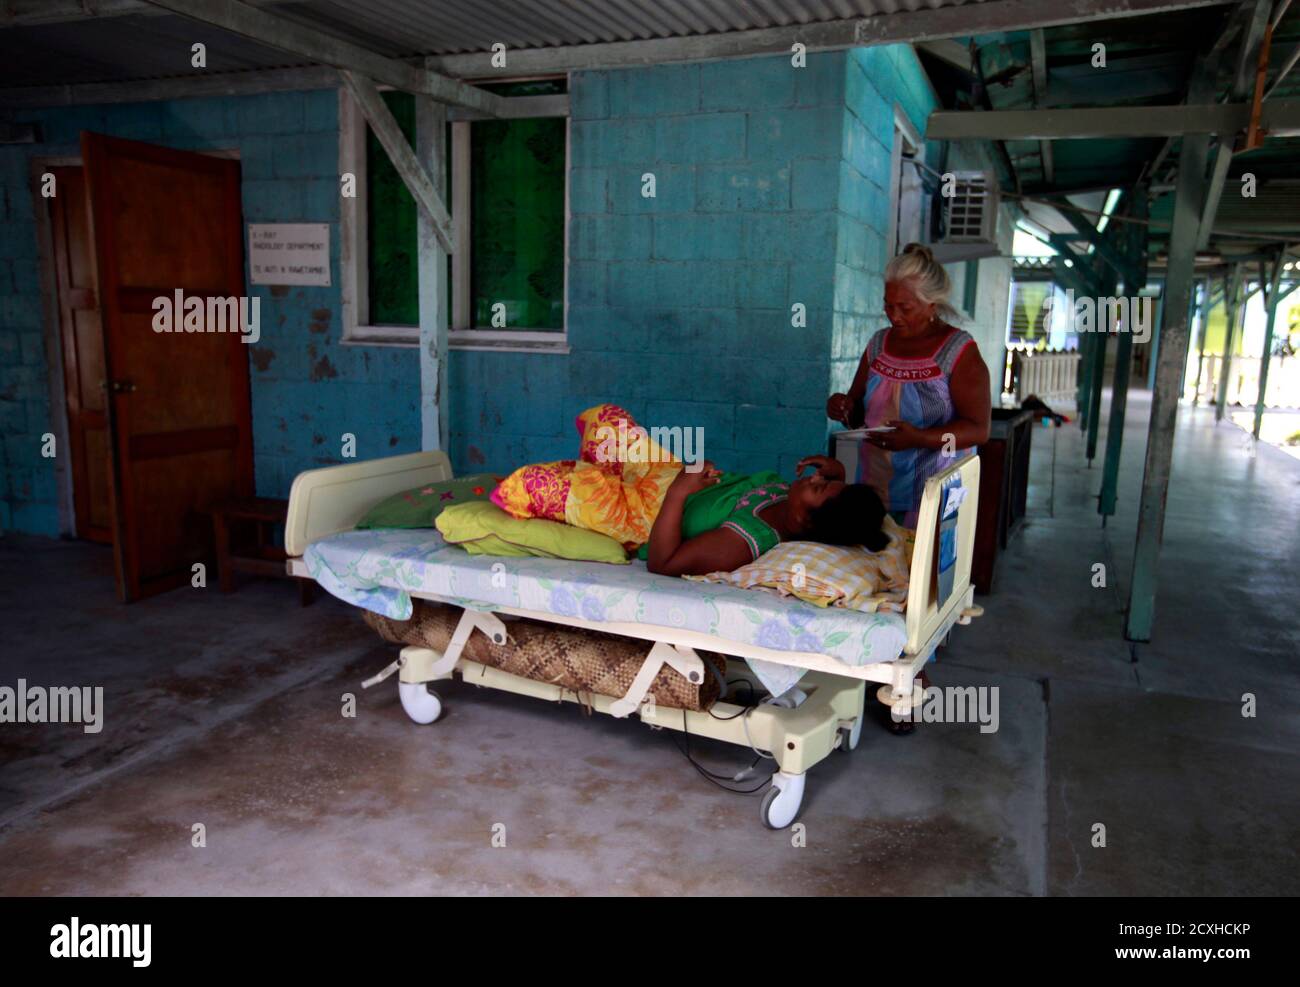 A woman prepares to feed a patient on a bed, placed outside due to lack of space, at the Nawerewere Hospital on South Tarawa in the central Pacific island nation of Kiribati May 25, 2013. Kiribati consists of a chain of 33 atolls and islands that stand just metres above sea level, spread over a huge expanse of otherwise empty ocean. With surrounding sea levels rising, Kiribati President Anote Tong has predicted his country will likely become uninhabitable in 30-60 years because of inundation and contamination of its freshwater supplies. Picture taken May 25, 2013.  REUTERS/David Gray     (KIRI Stock Photo